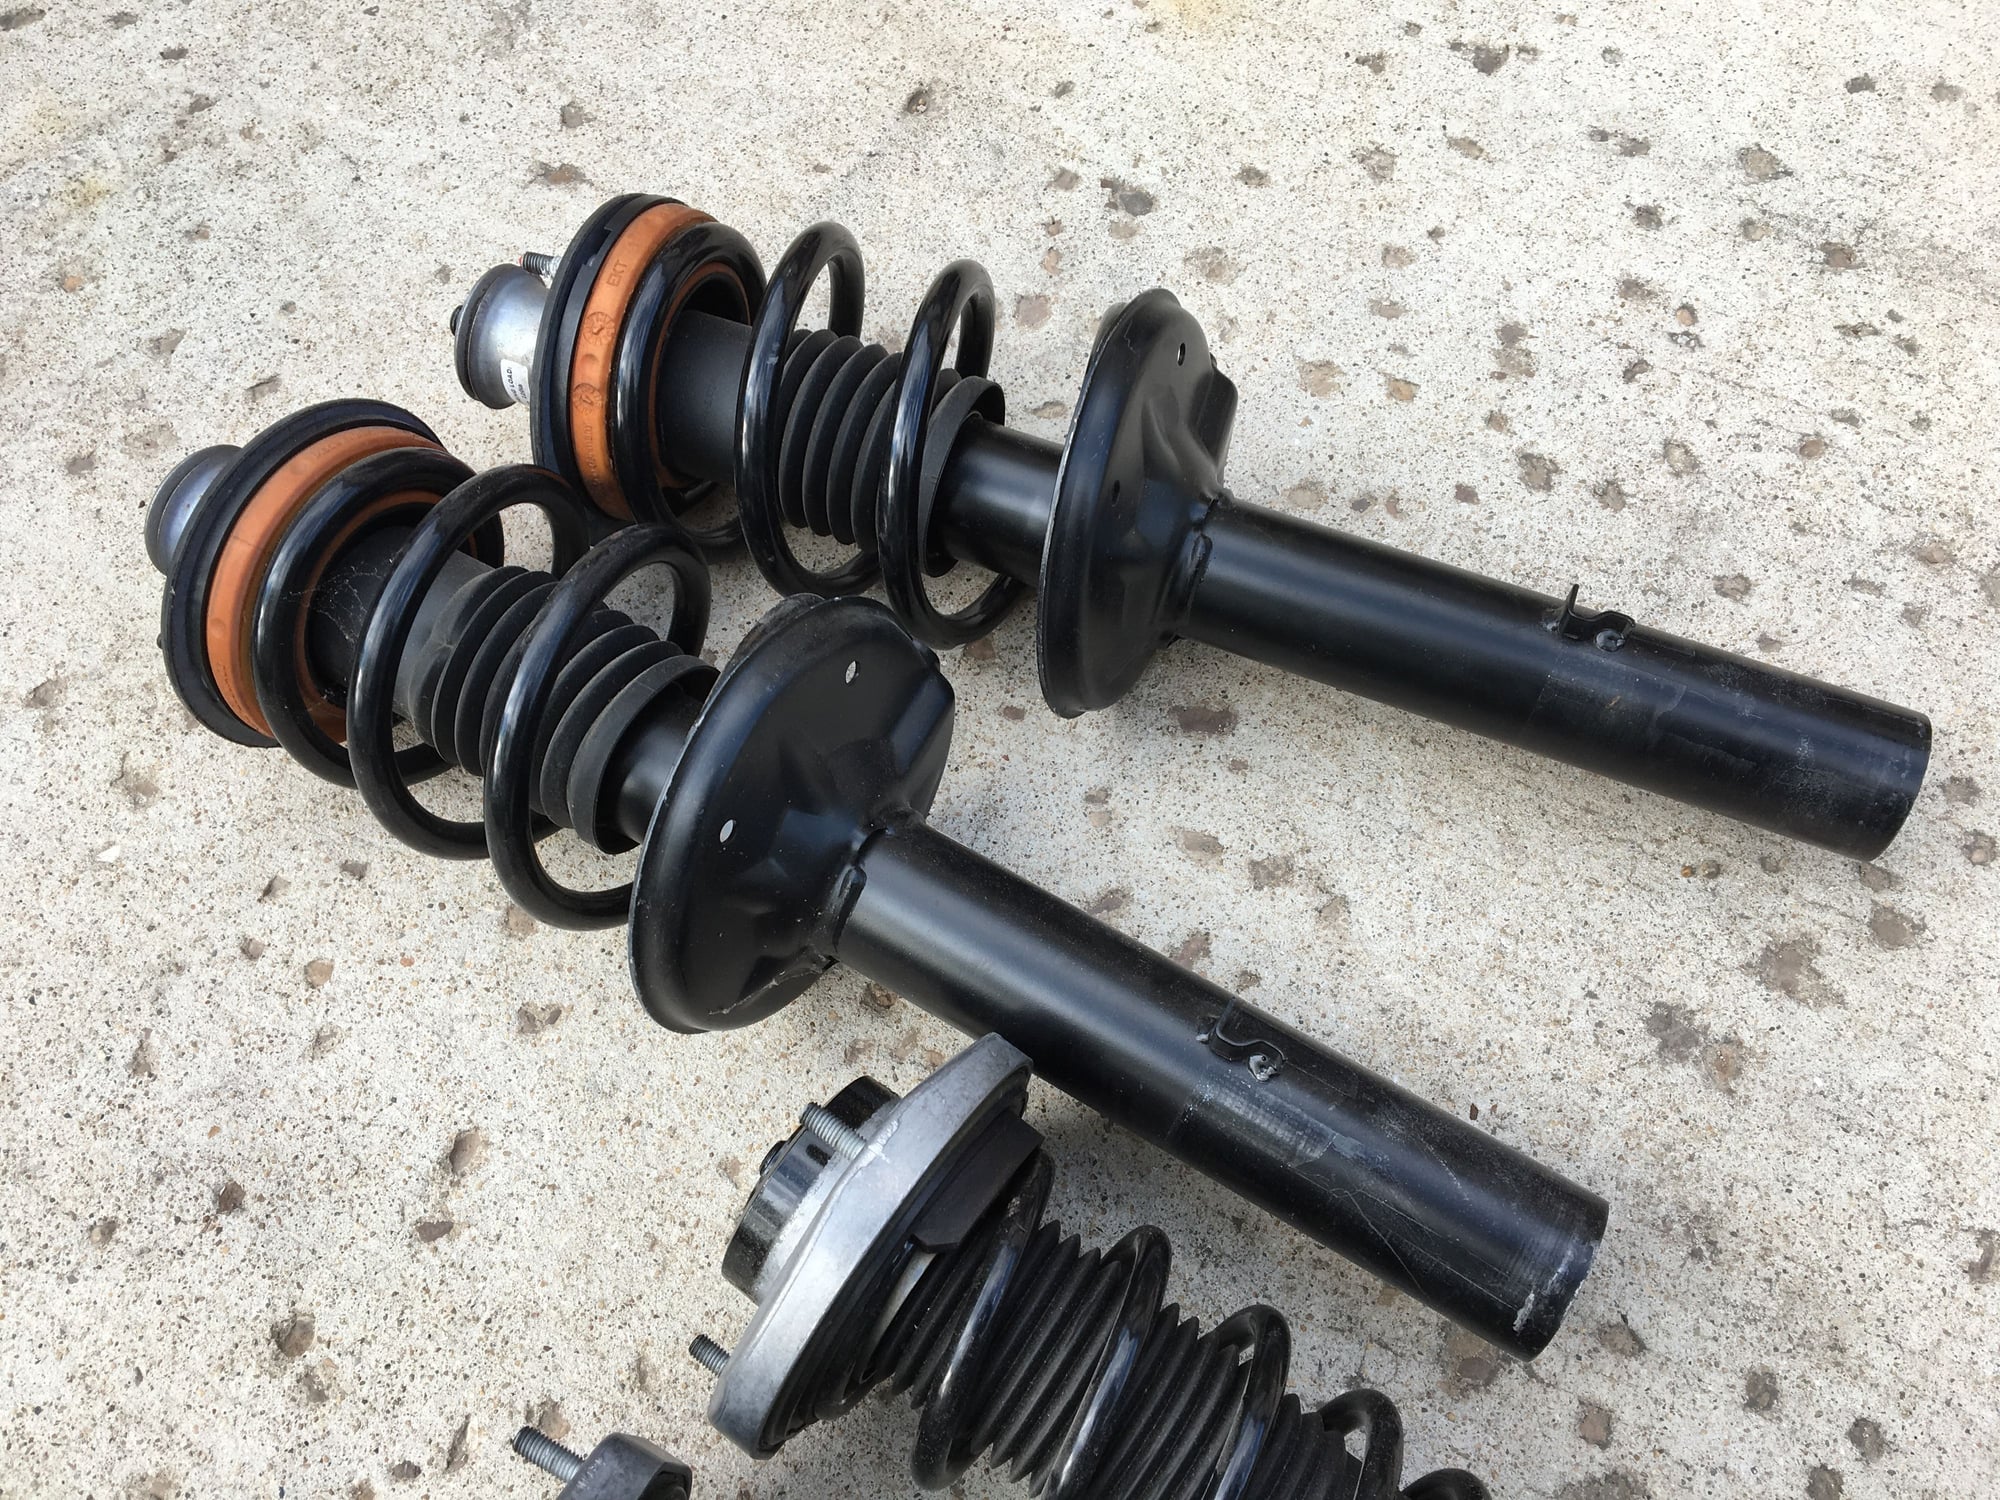 Steering/Suspension - FS: 981 OEM Sport Suspension Front and Rear Struts - Used - 2013 to 2019 Porsche Boxster - 2014 to 2019 Porsche Cayman - Naperville, IL 60563, United States